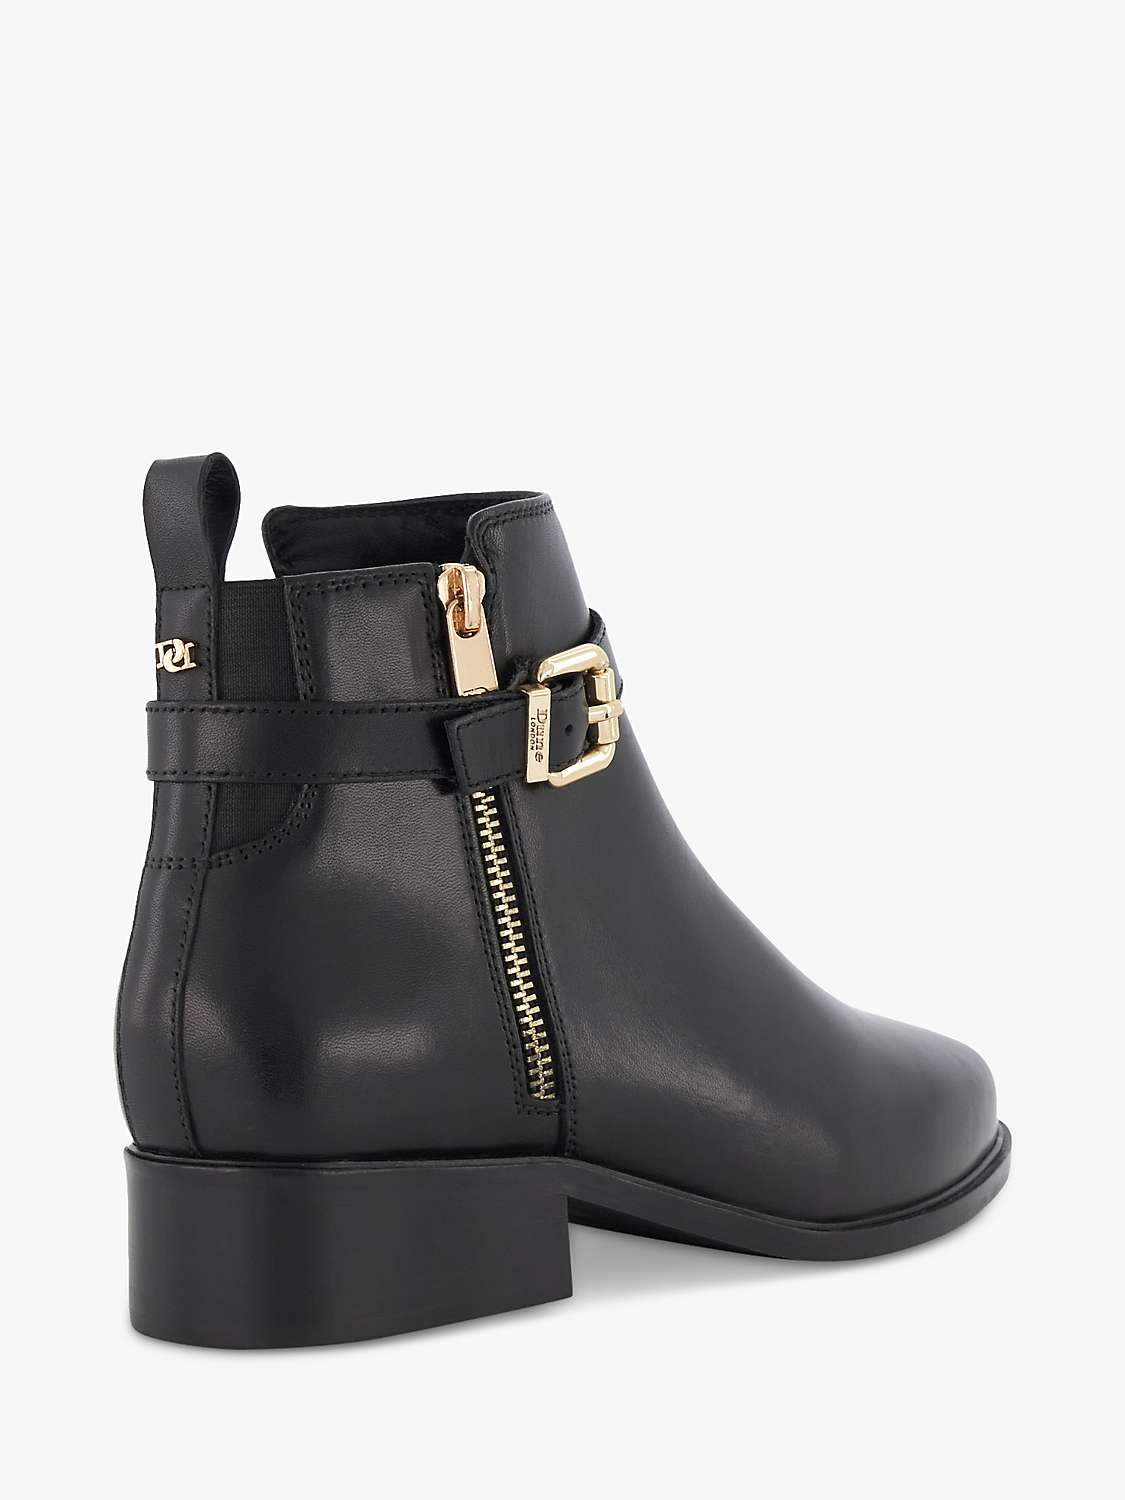 Buy Dune Wide Fit Pepi Leather Ankle Boots Online at johnlewis.com